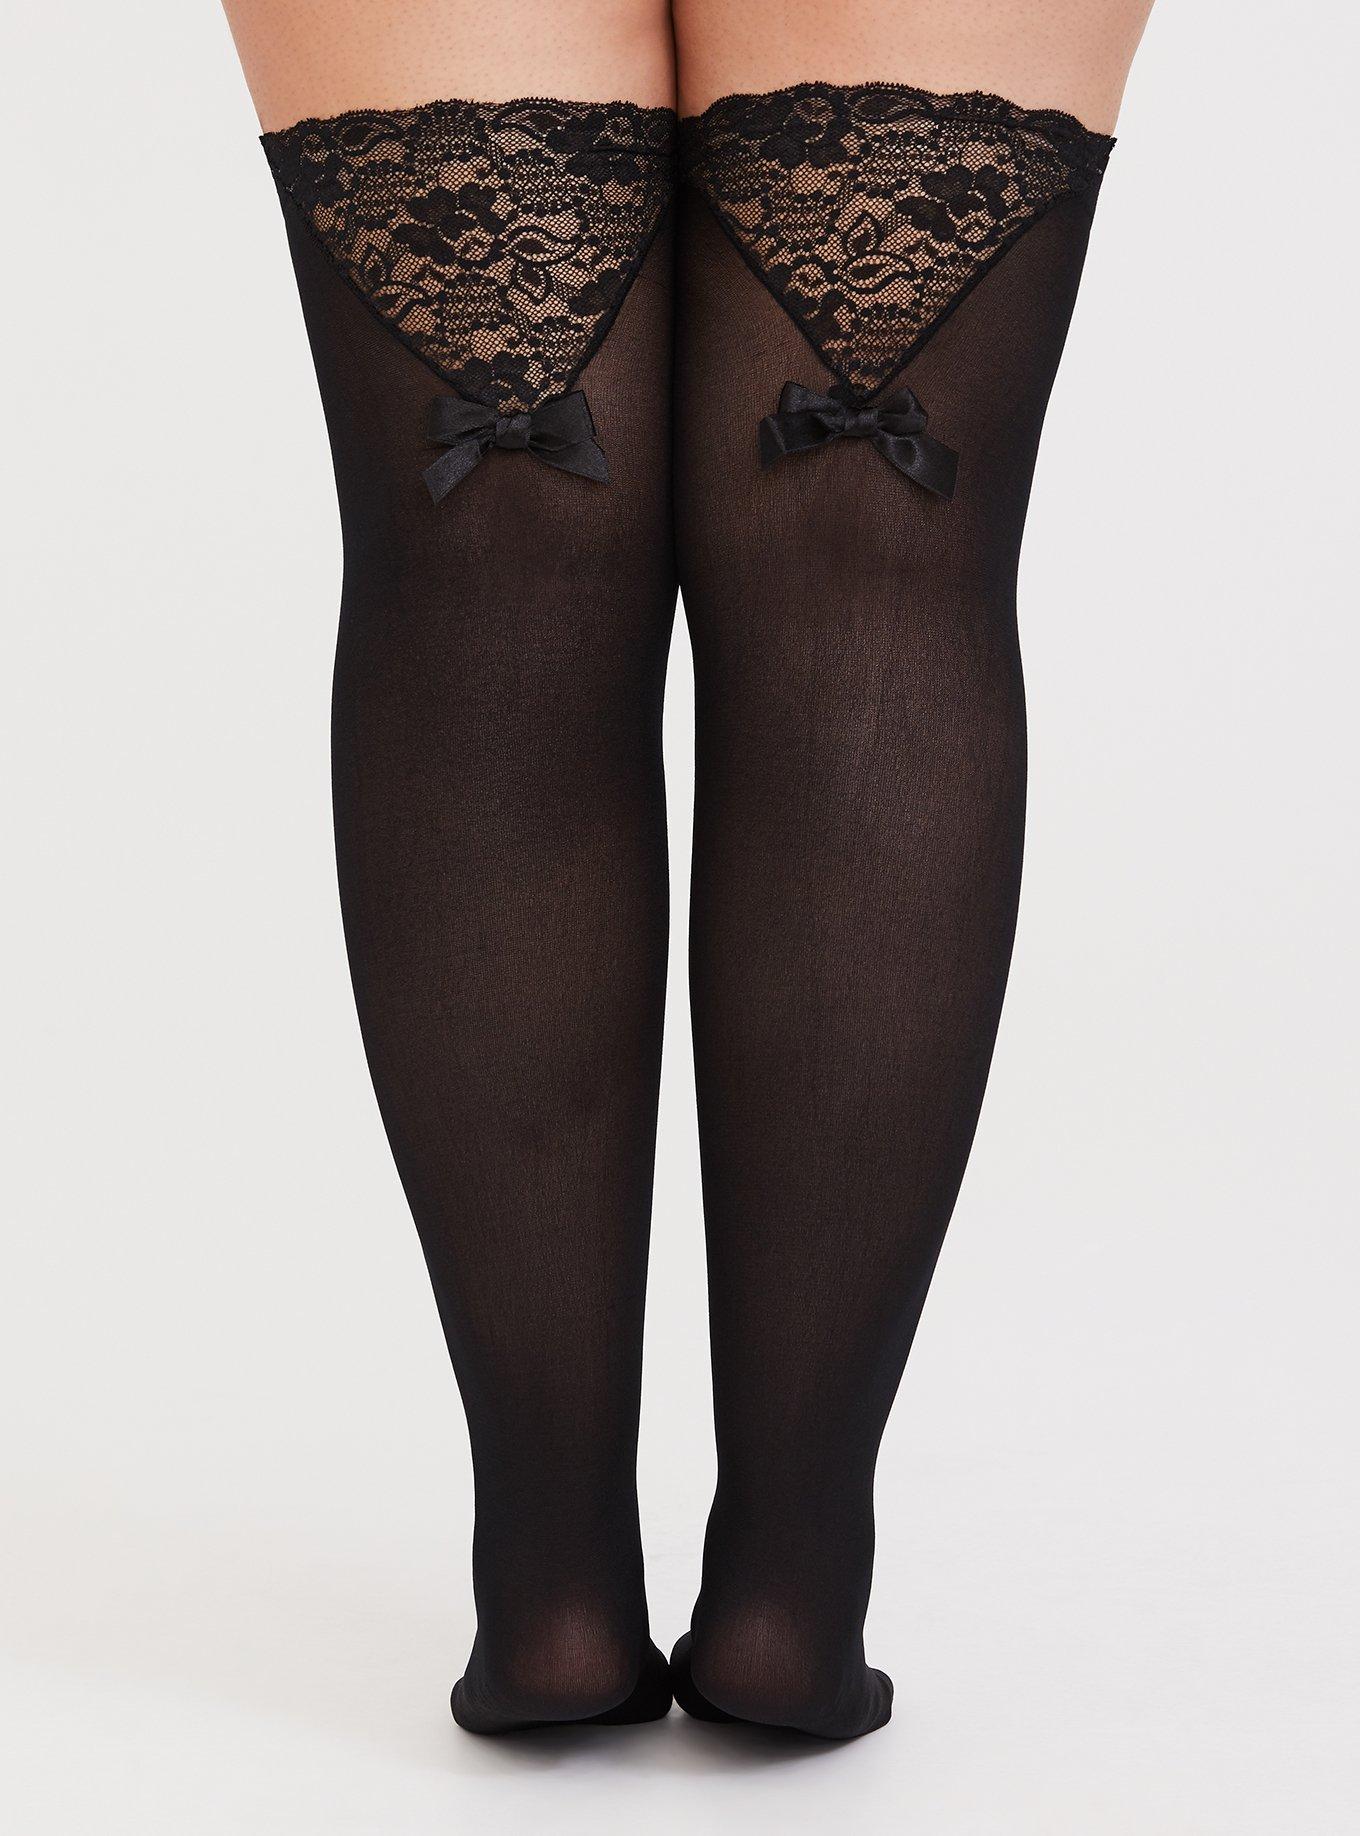 Plus Size - Black Lace Trimmed Thigh High Tights - Torrid